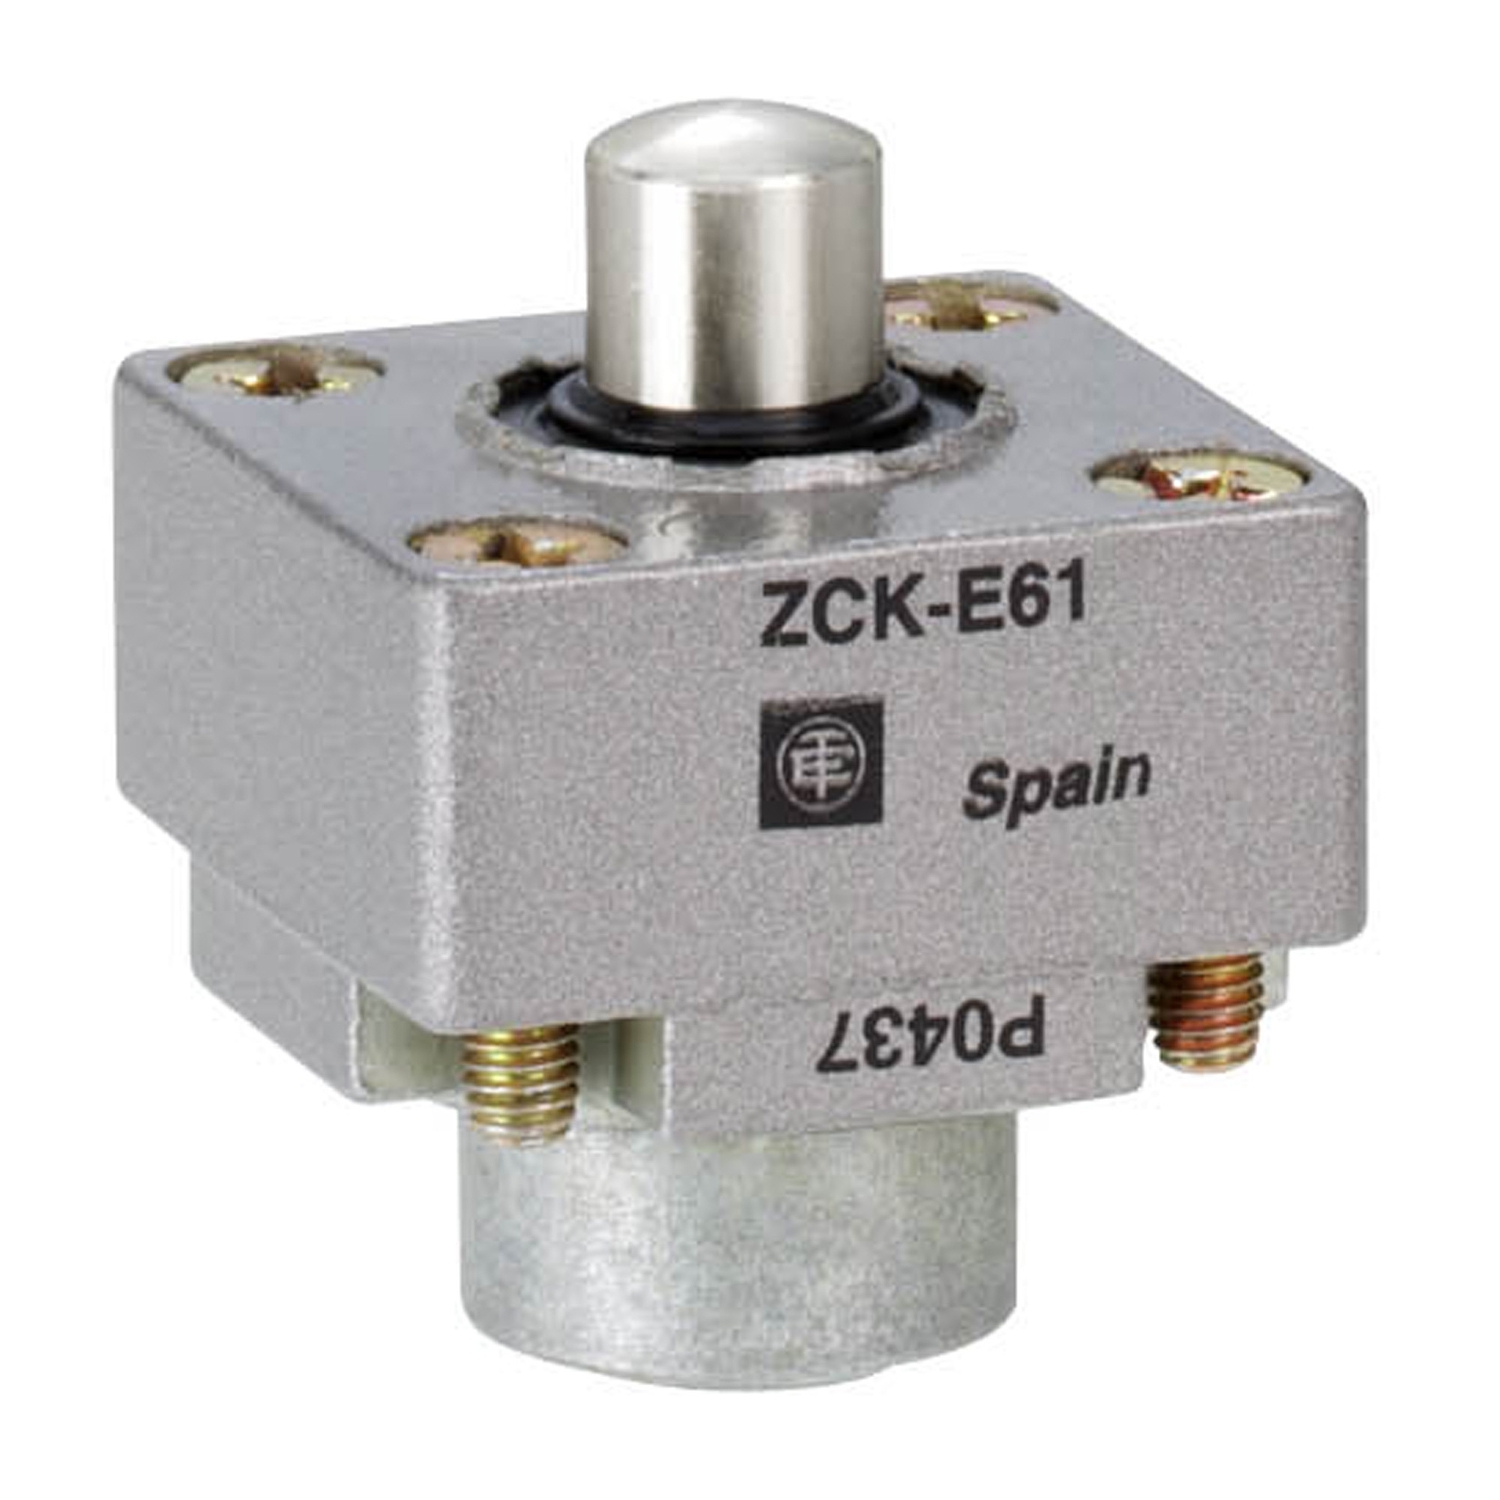 Limit switch head, Limit switches XC Standard, ZCKE, metal end plunger